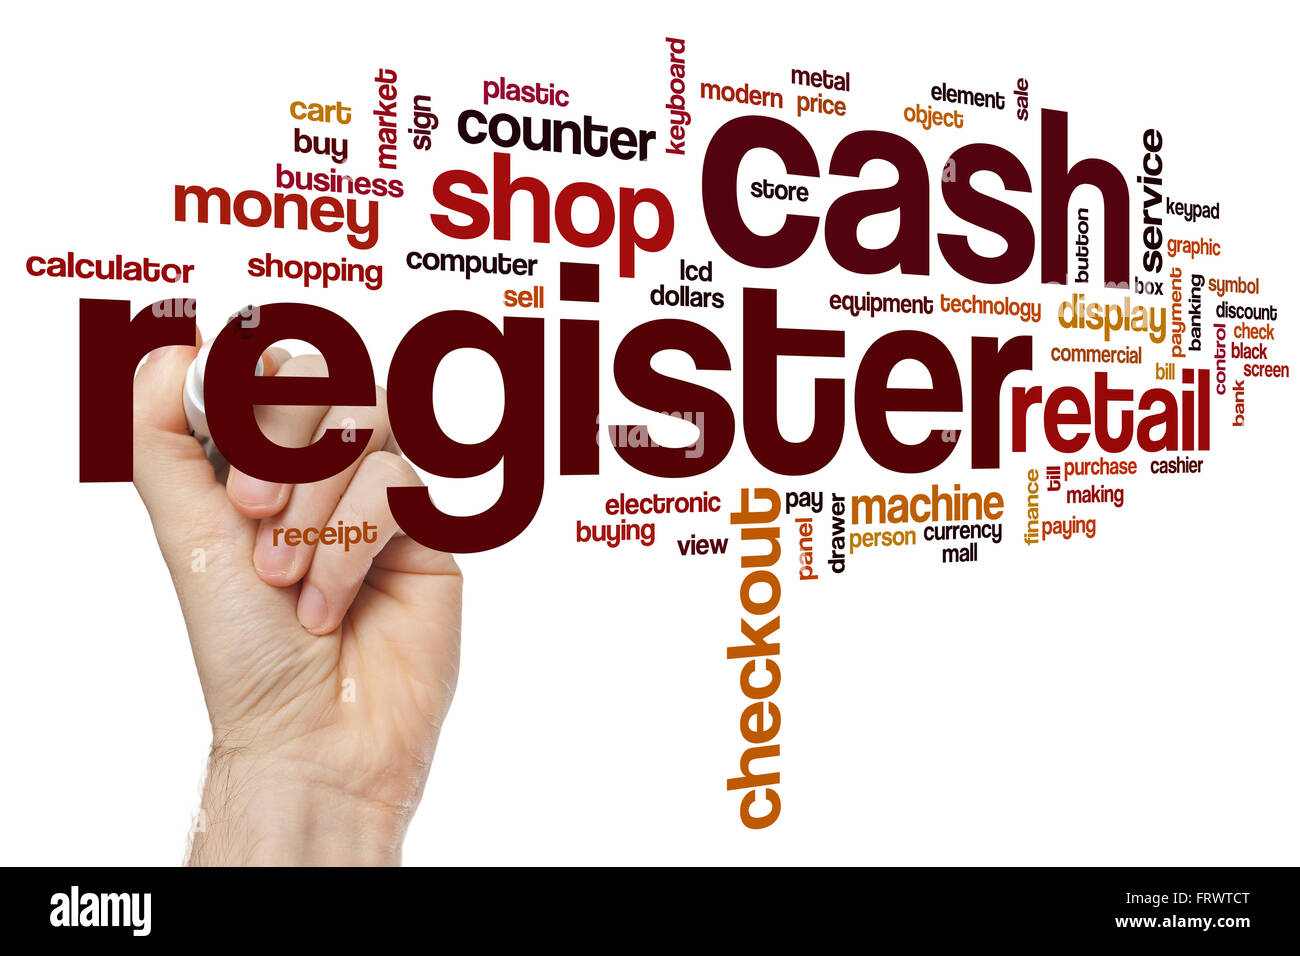 Cash register cloud concept with retail shop related tags Stock Photo